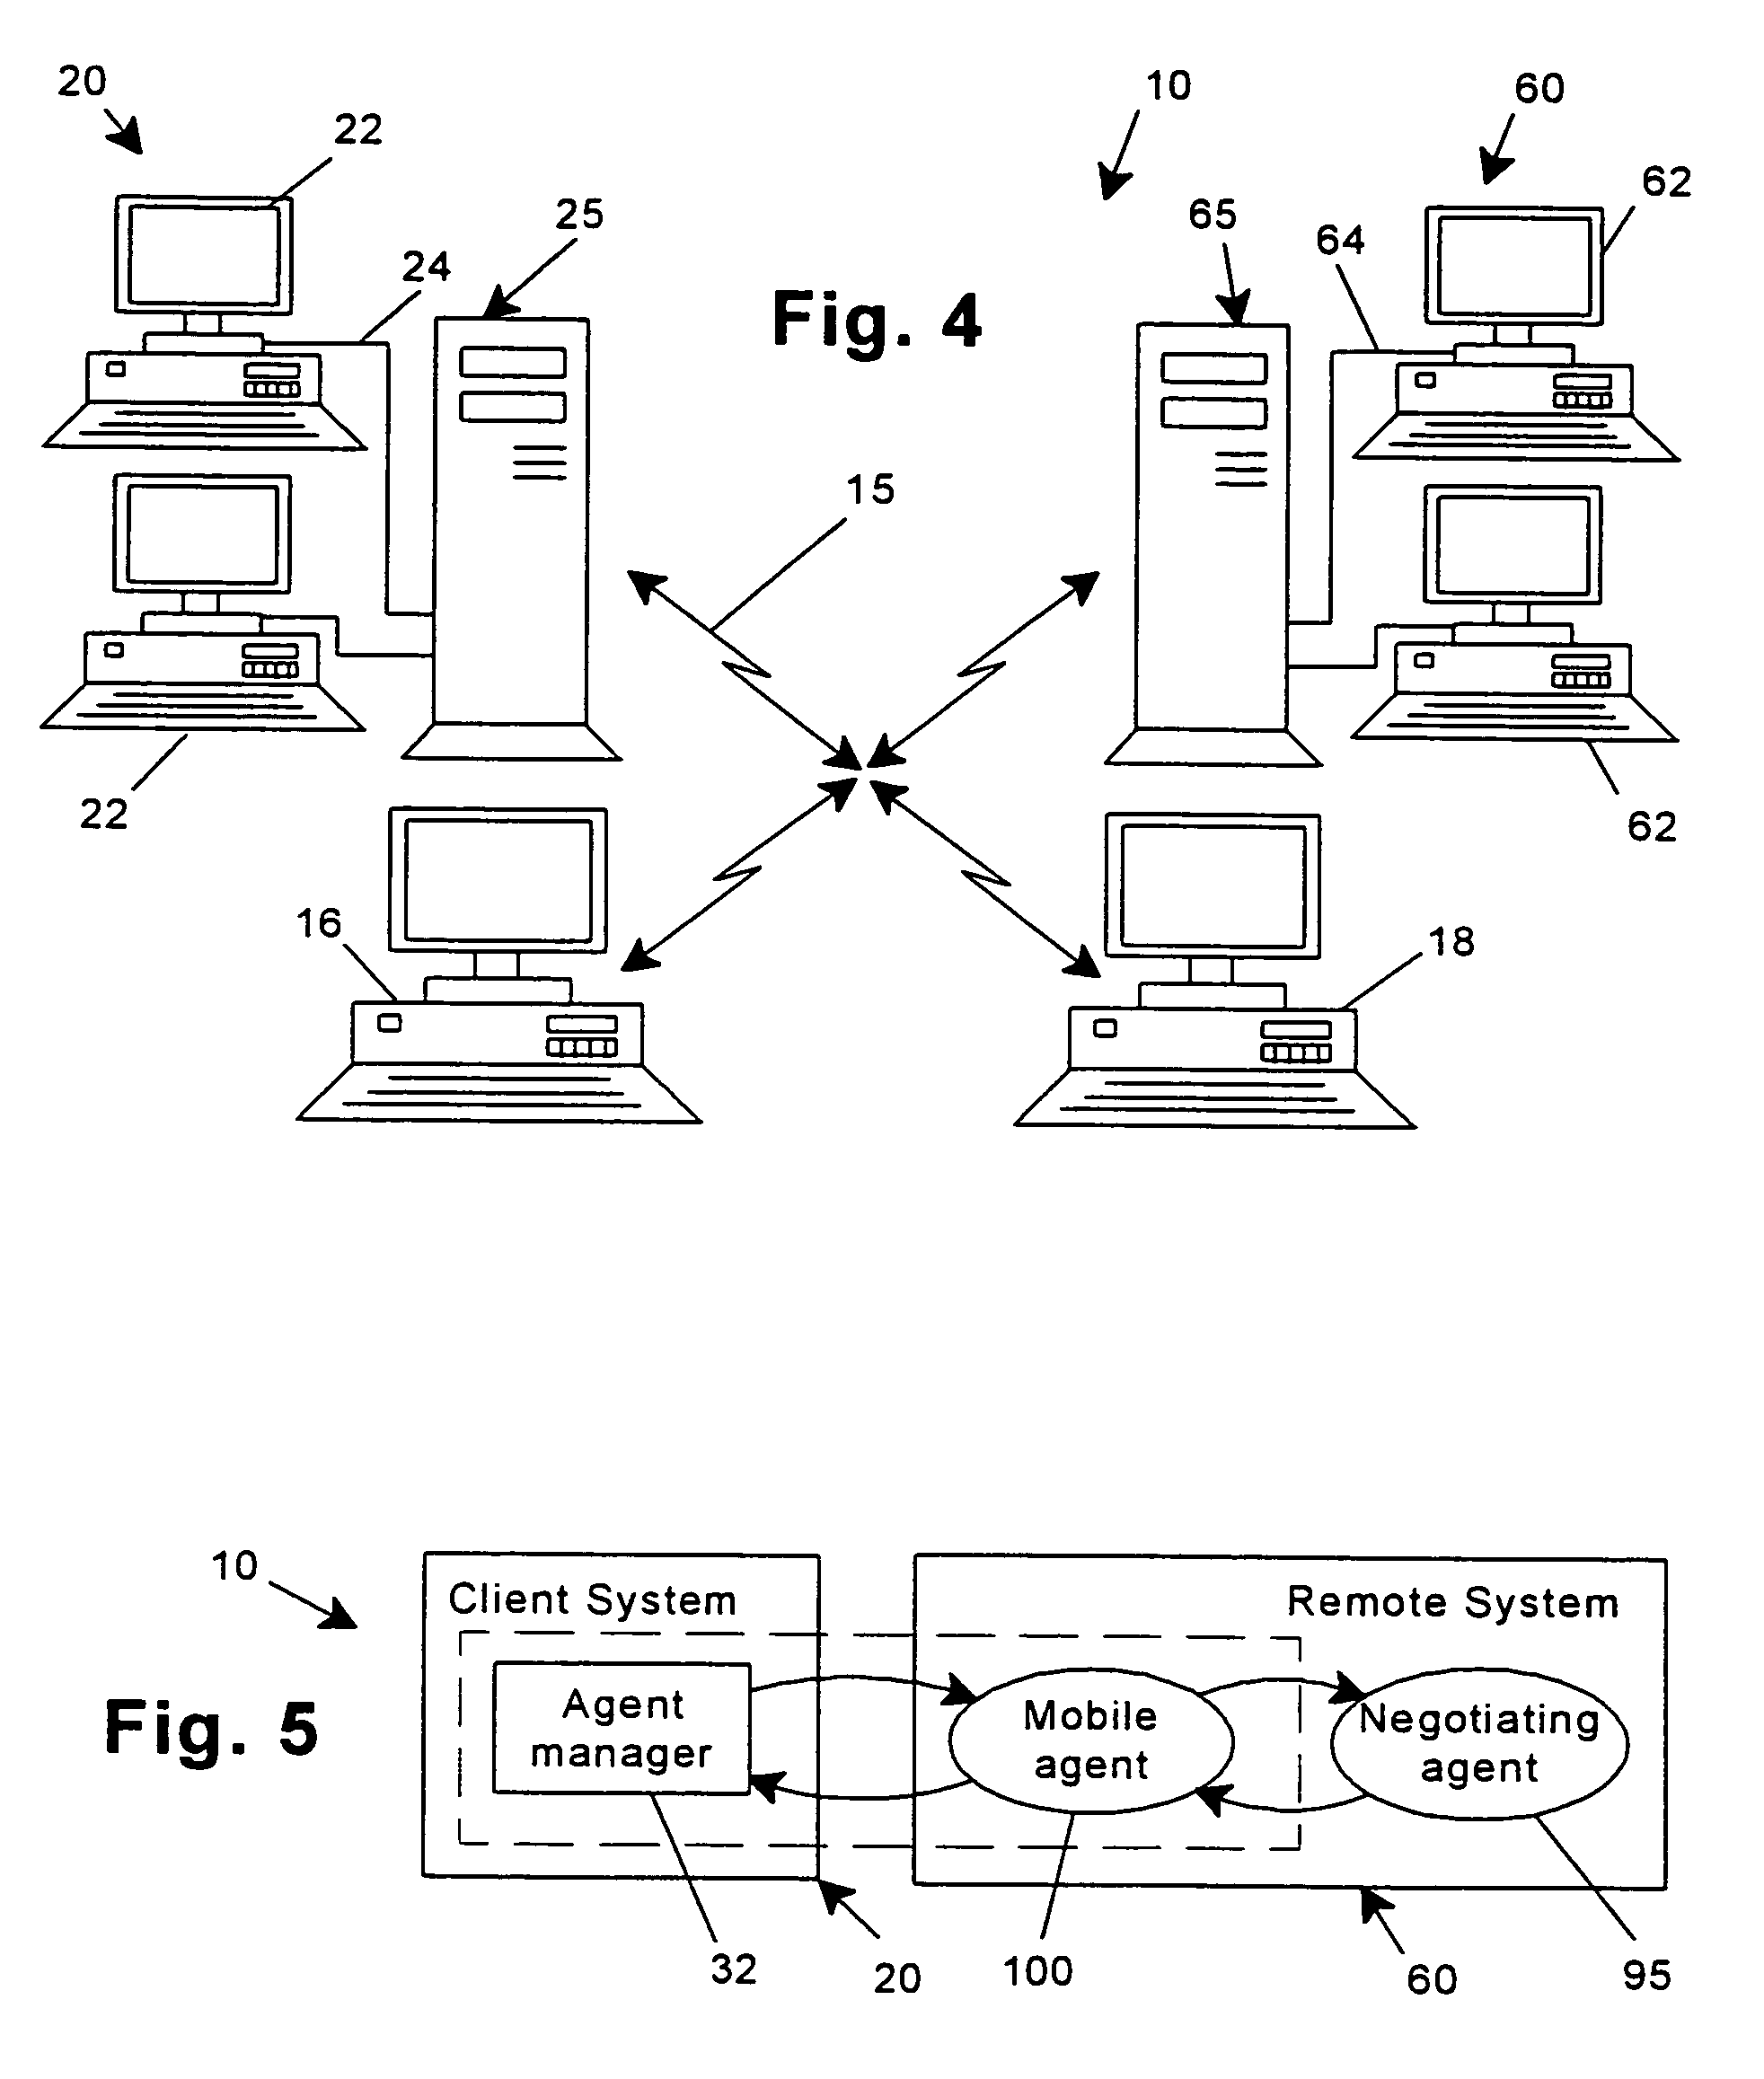 Optimizing the performance of computer tasks using intelligent agent with multiple program modules having varied degrees of domain knowledge